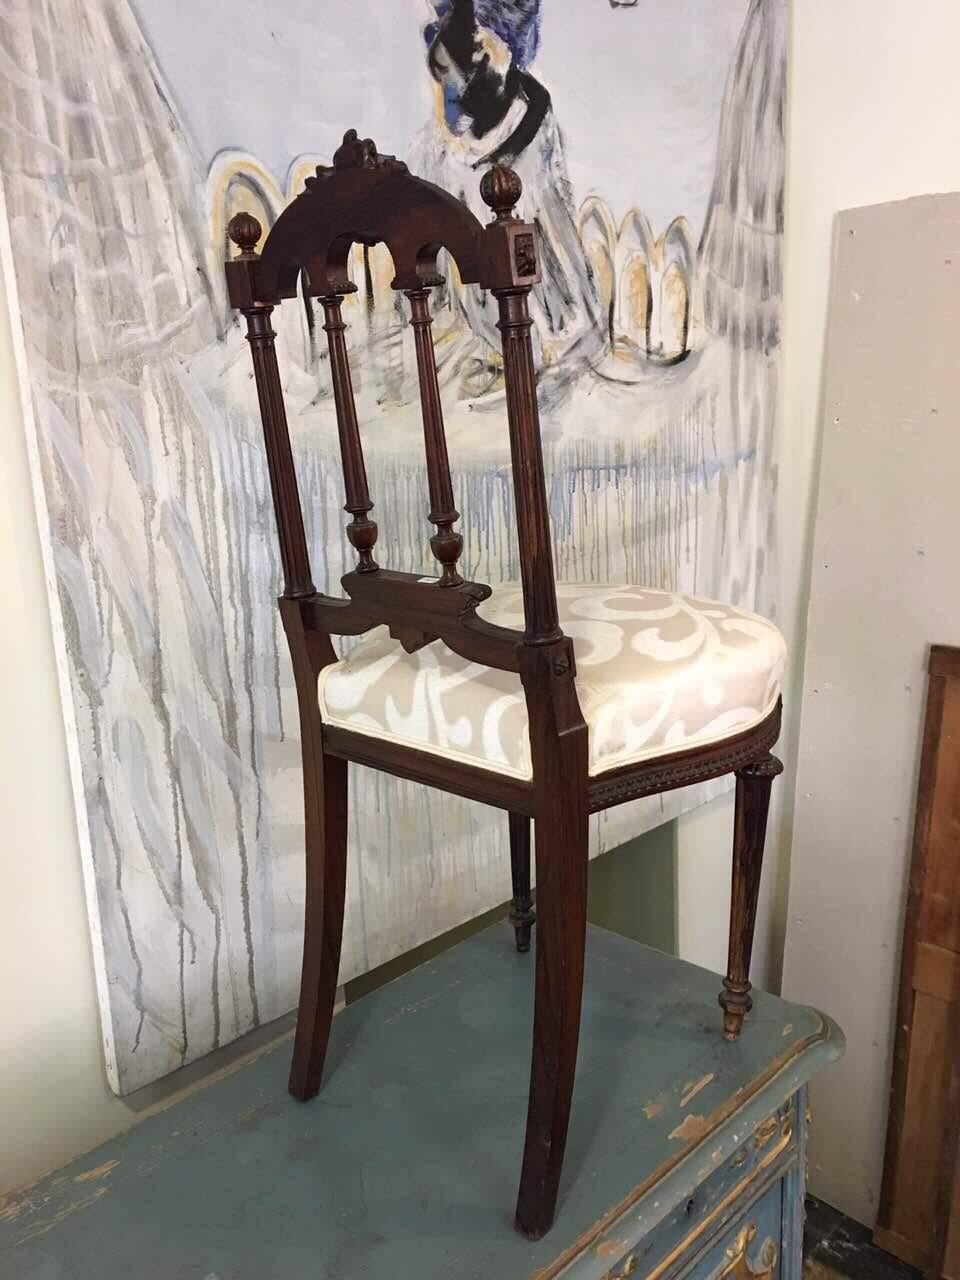 Pair of petite 19th century French beautifully carved walnut side chairs in Victorian style.
Very stable and comfortable with new white upholstery,
circa 1870.